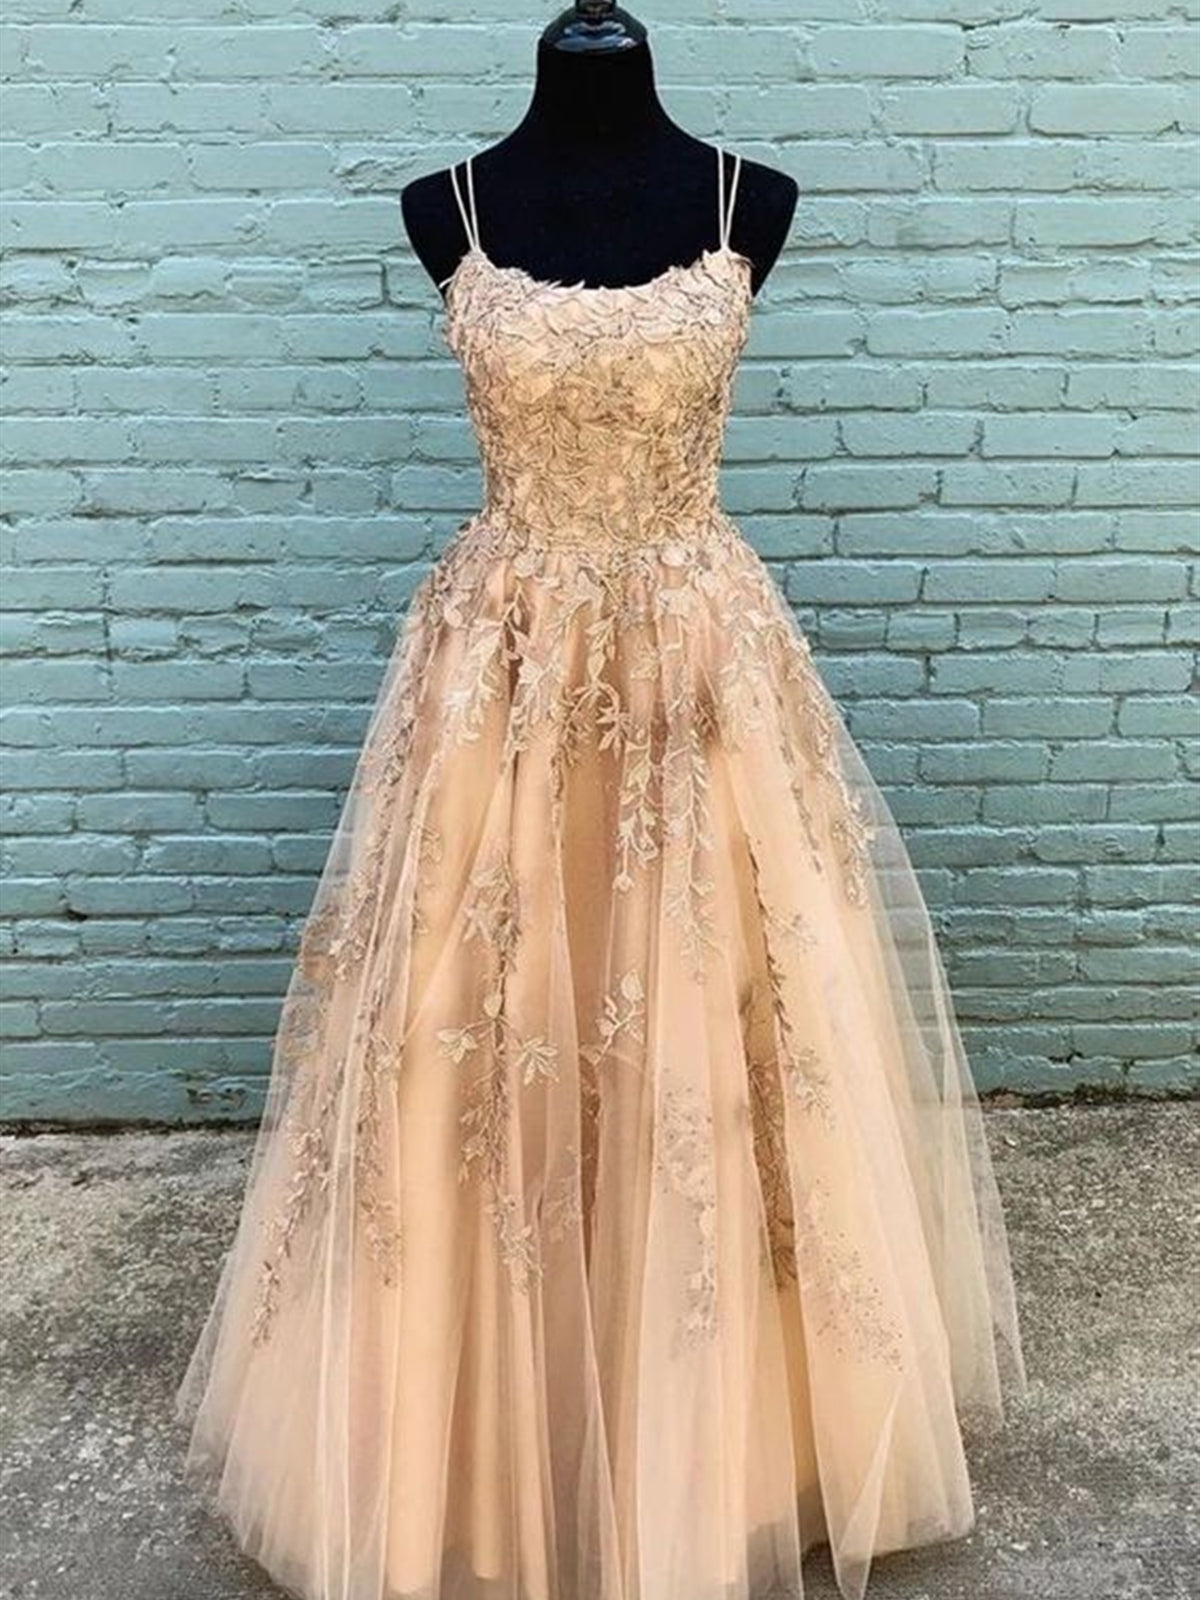 Party Dresses For Wedding, Long Champagne Lace Prom Dresses, Champagne Lace Formal Graduation Dresses